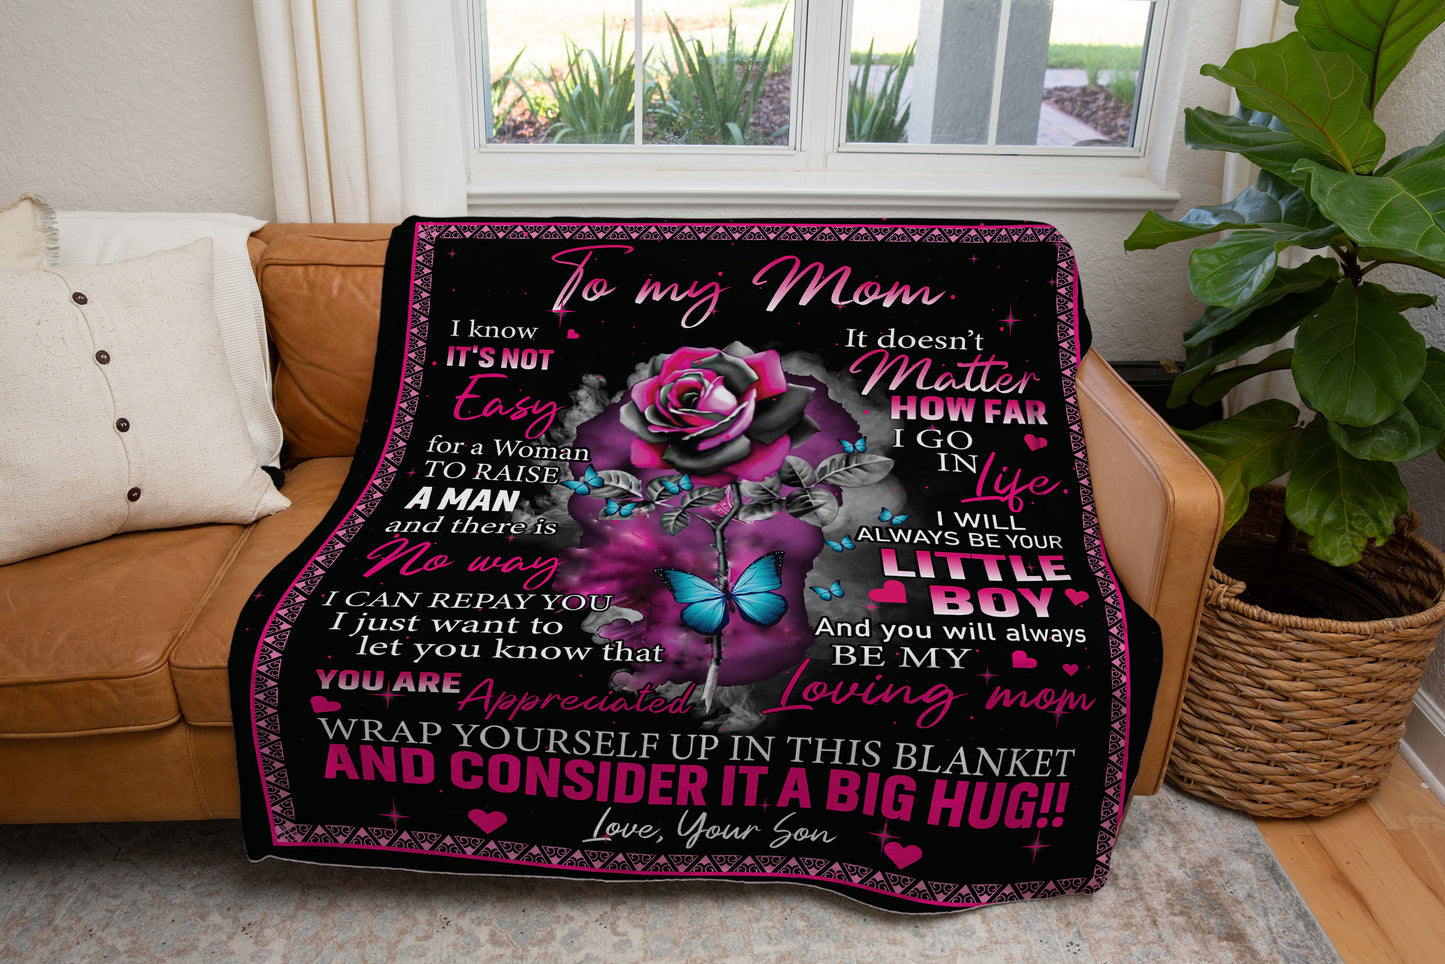 Mom "You Are Appreciated" Blanket From Son